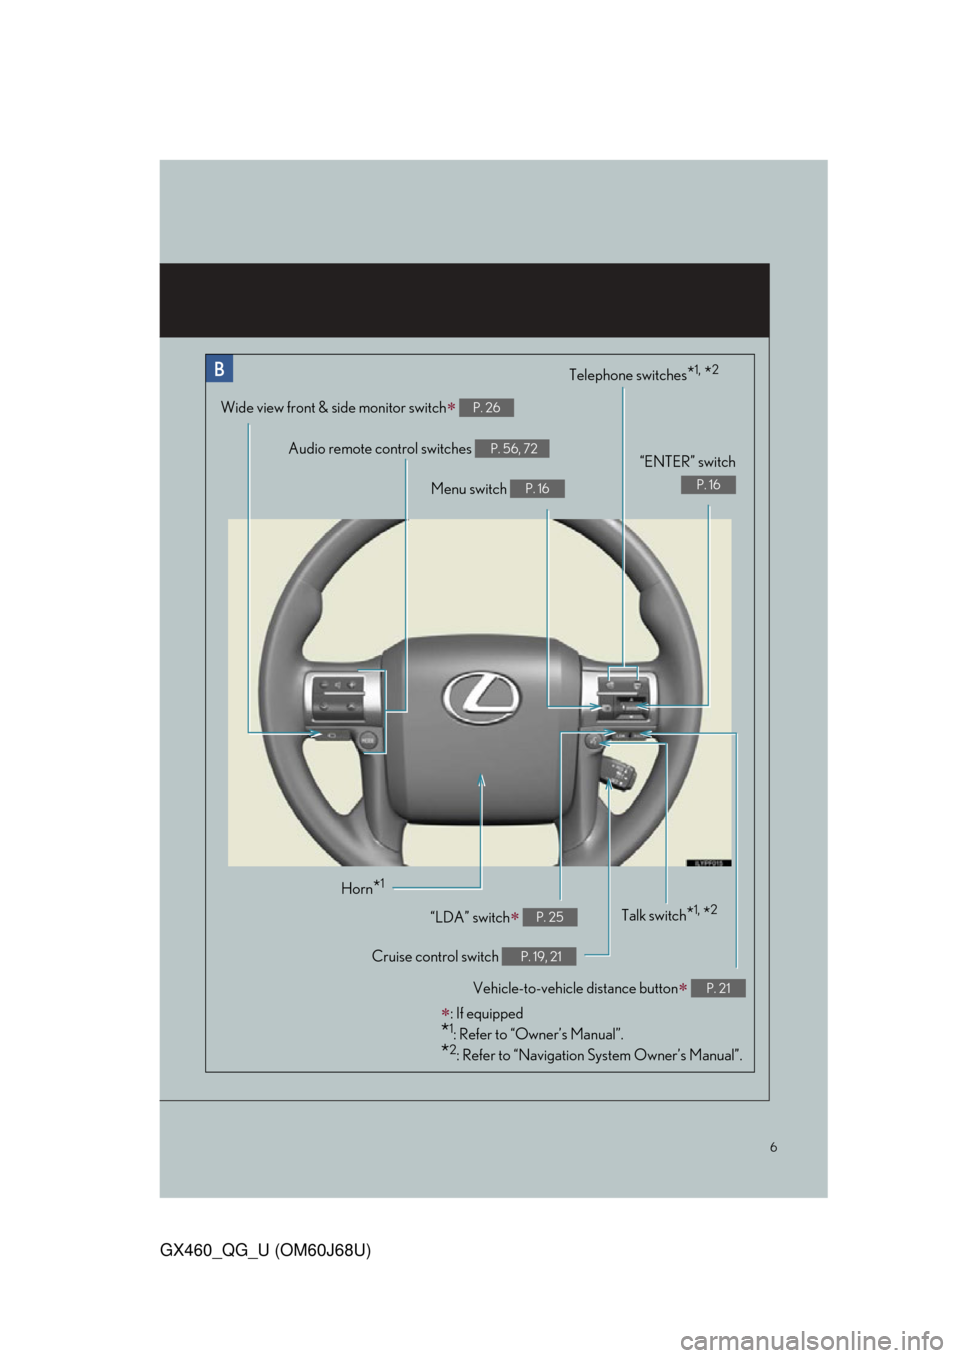 Lexus GX460 2013  Specifications / 6
GX460_QG_U (OM60J68U)
Audio remote control switches P. 56, 72
Telephone switches*1, *2
Menu switch P. 16
“ENTER” switch
P. 16
Wide view front & side monitor switch P. 26
Horn*1
Talk switch*1,